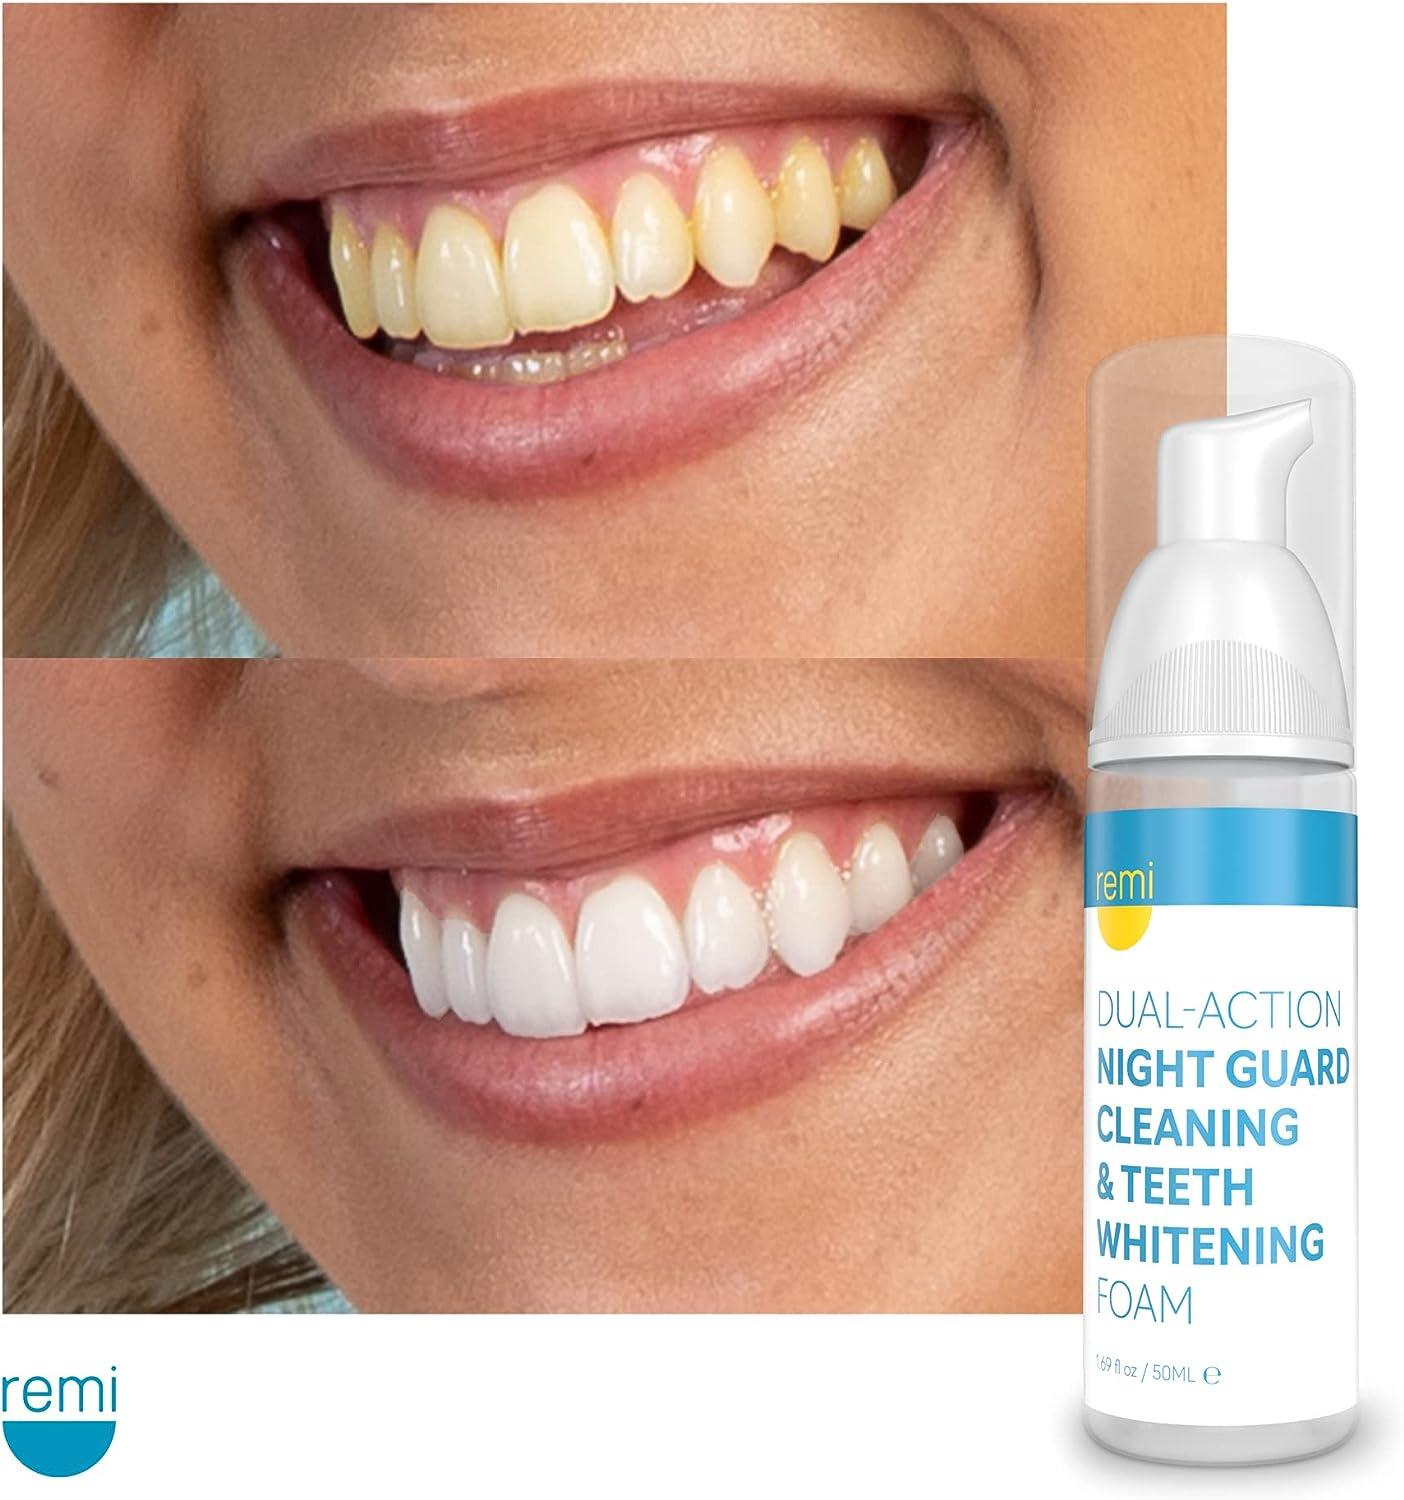 Whitening Mouth Guards - Teeth Whitening